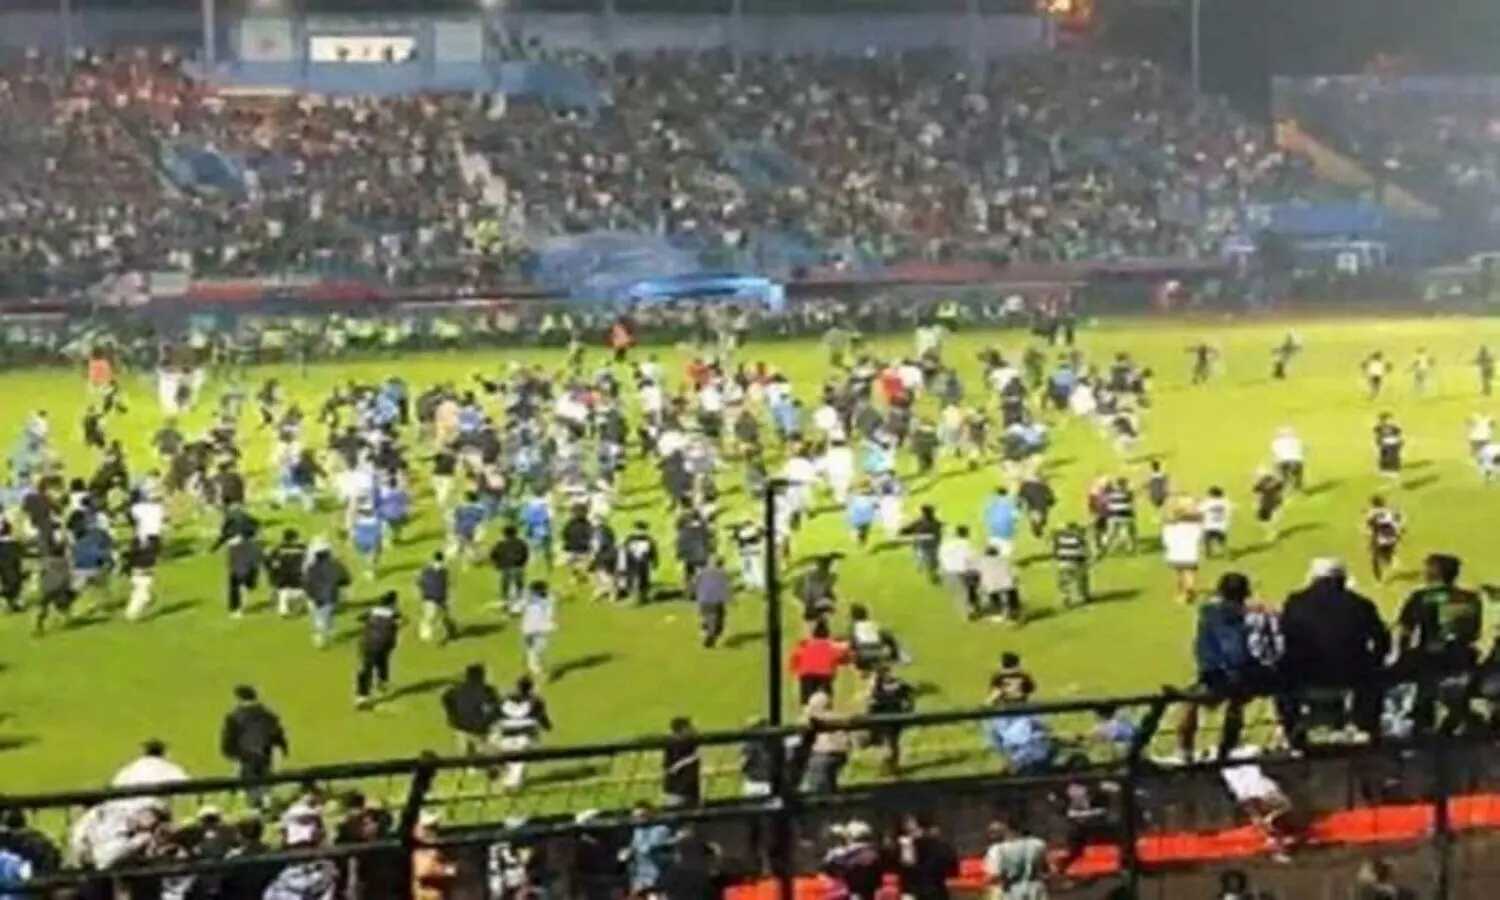 Indonesia violence in football match